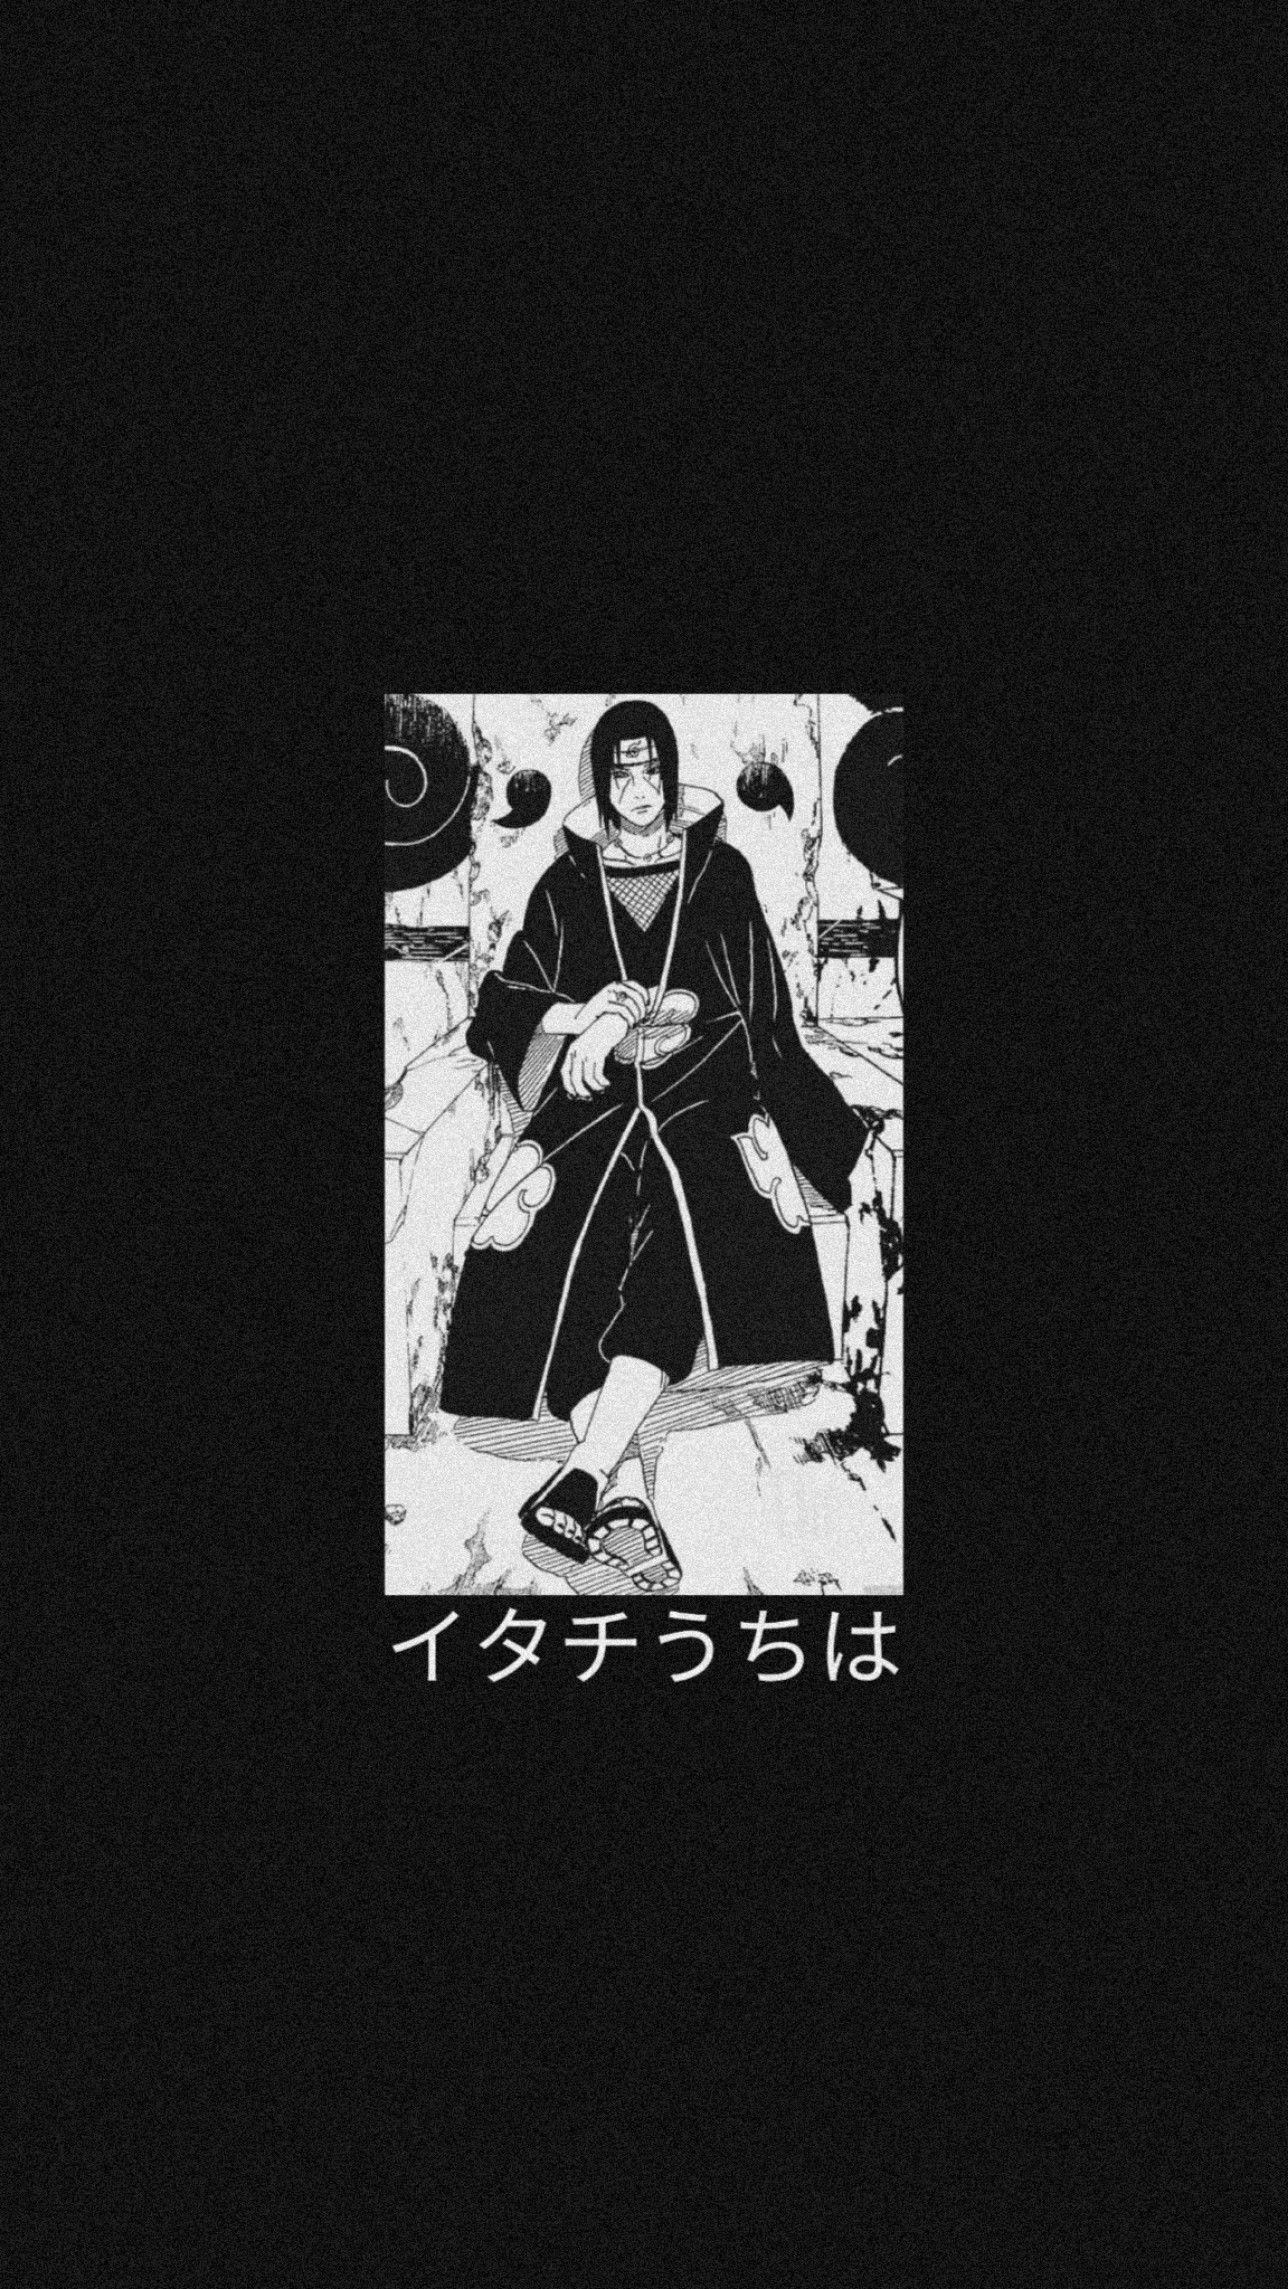 Itachi Black and White Wallpapers - Top Free Itachi Black and White